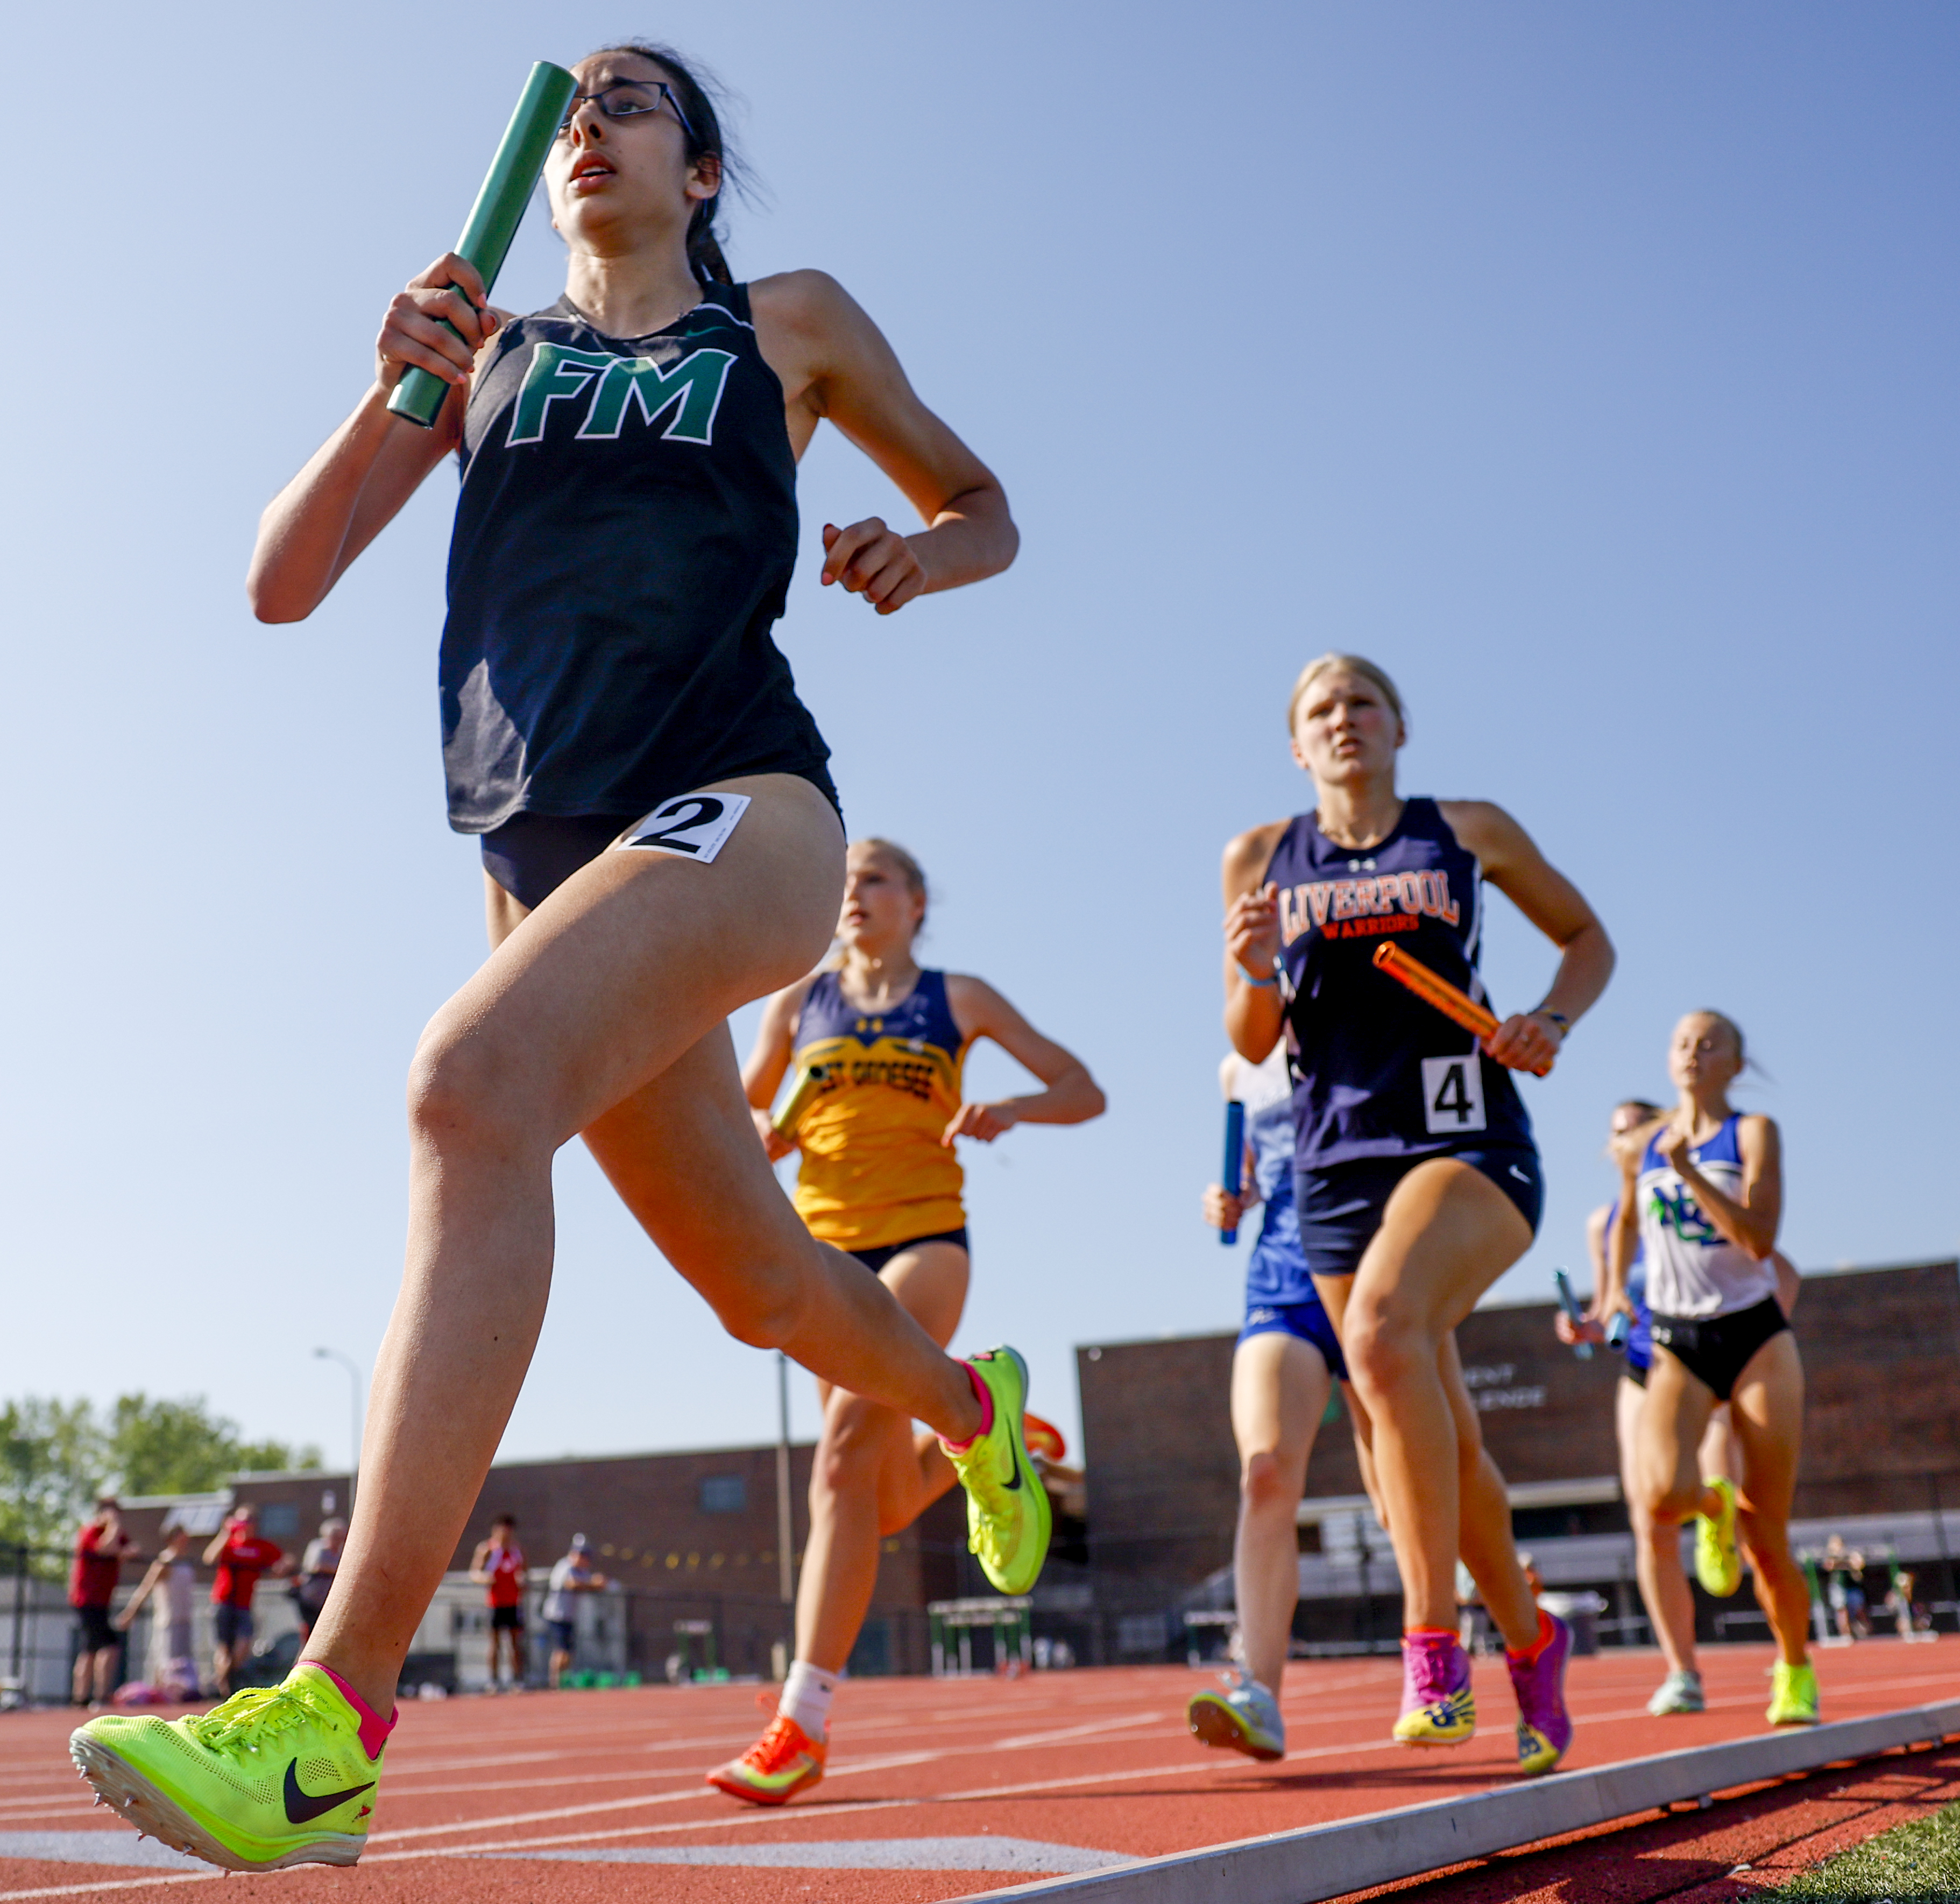 4 X 800 relay at the boys and girls Section III track & field qualifier at Cicero-North Syracuse High School Thursday, June 1, 2023. N. Scott Trimble | strimble@syracuse.com